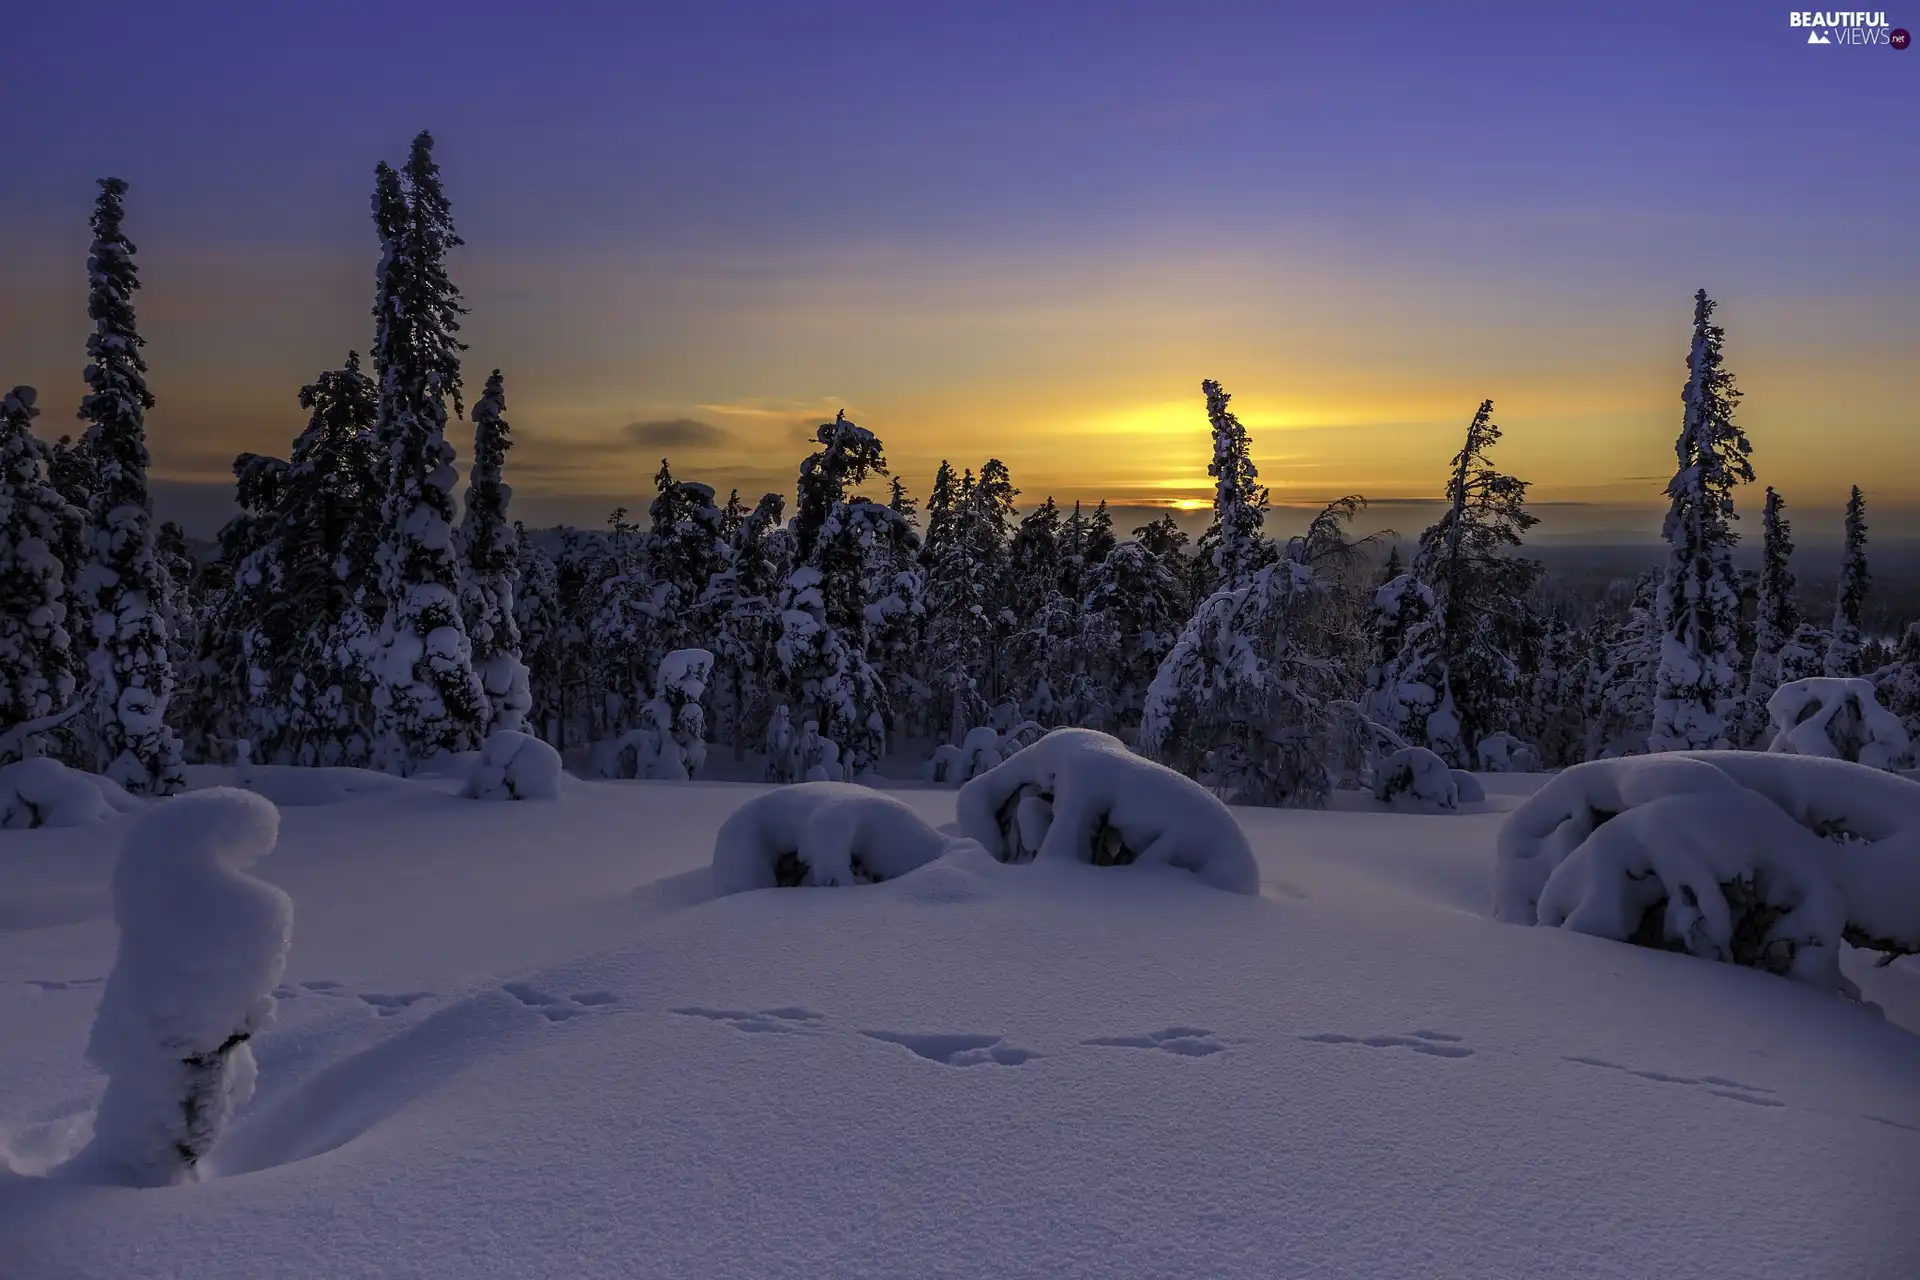 viewes, drifts, traces, Great Sunsets, snow, trees, Snowy, winter